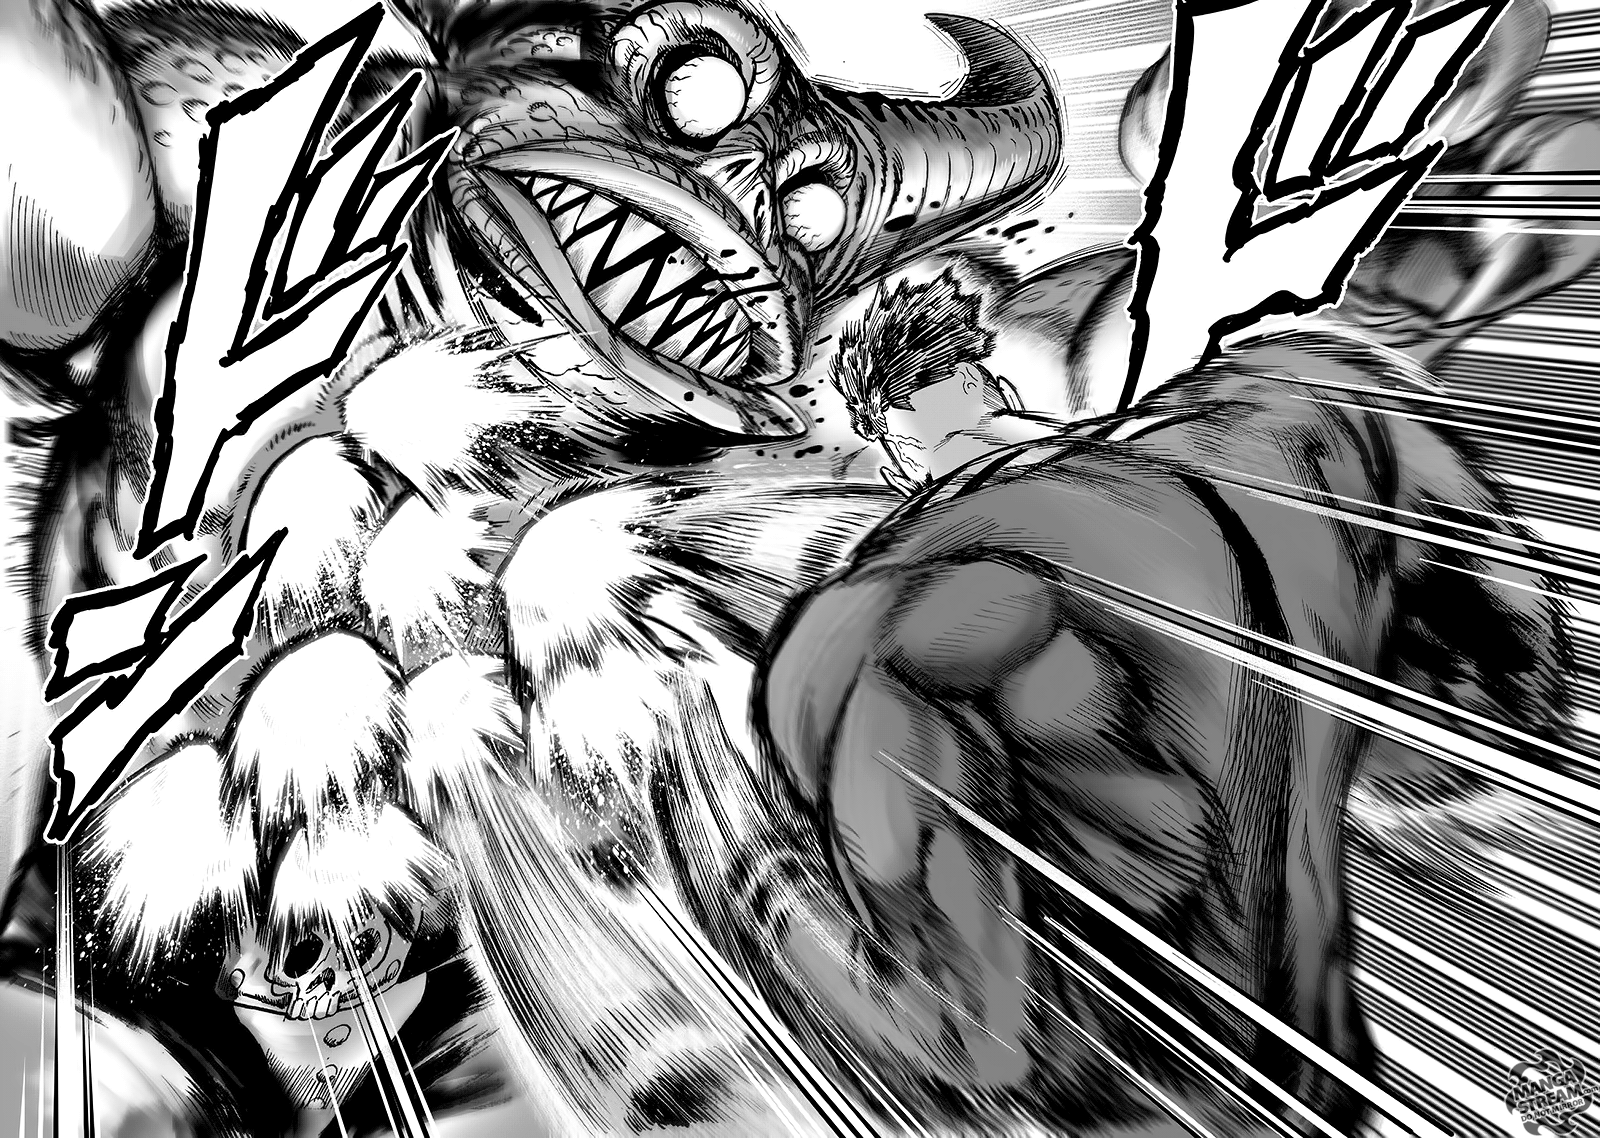 One Punch Man, Chapter 94 - I See image 134